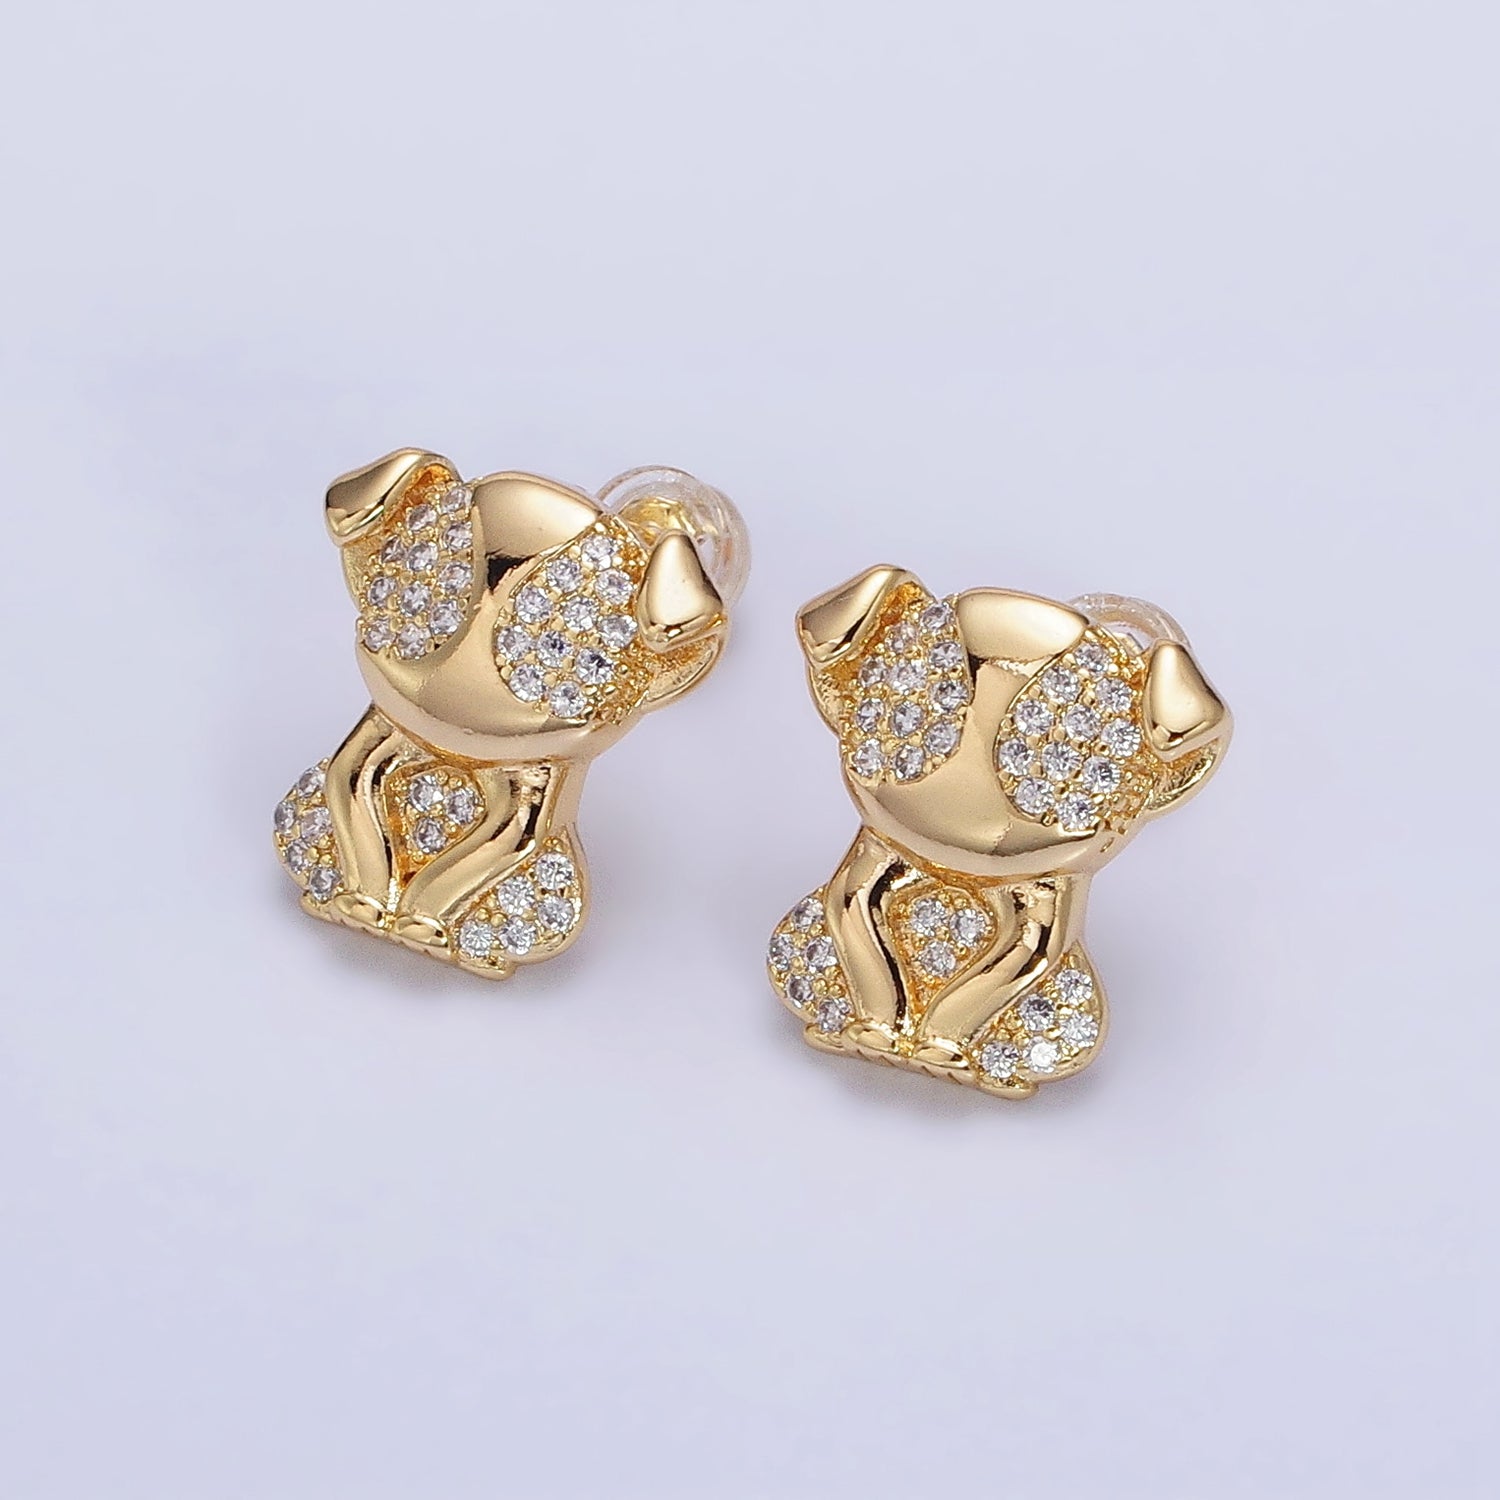 16K Gold Filled Sitting Puppy Dog Micro Paved CZ Stud Earrings in Gold & Silver | AB631 AB632